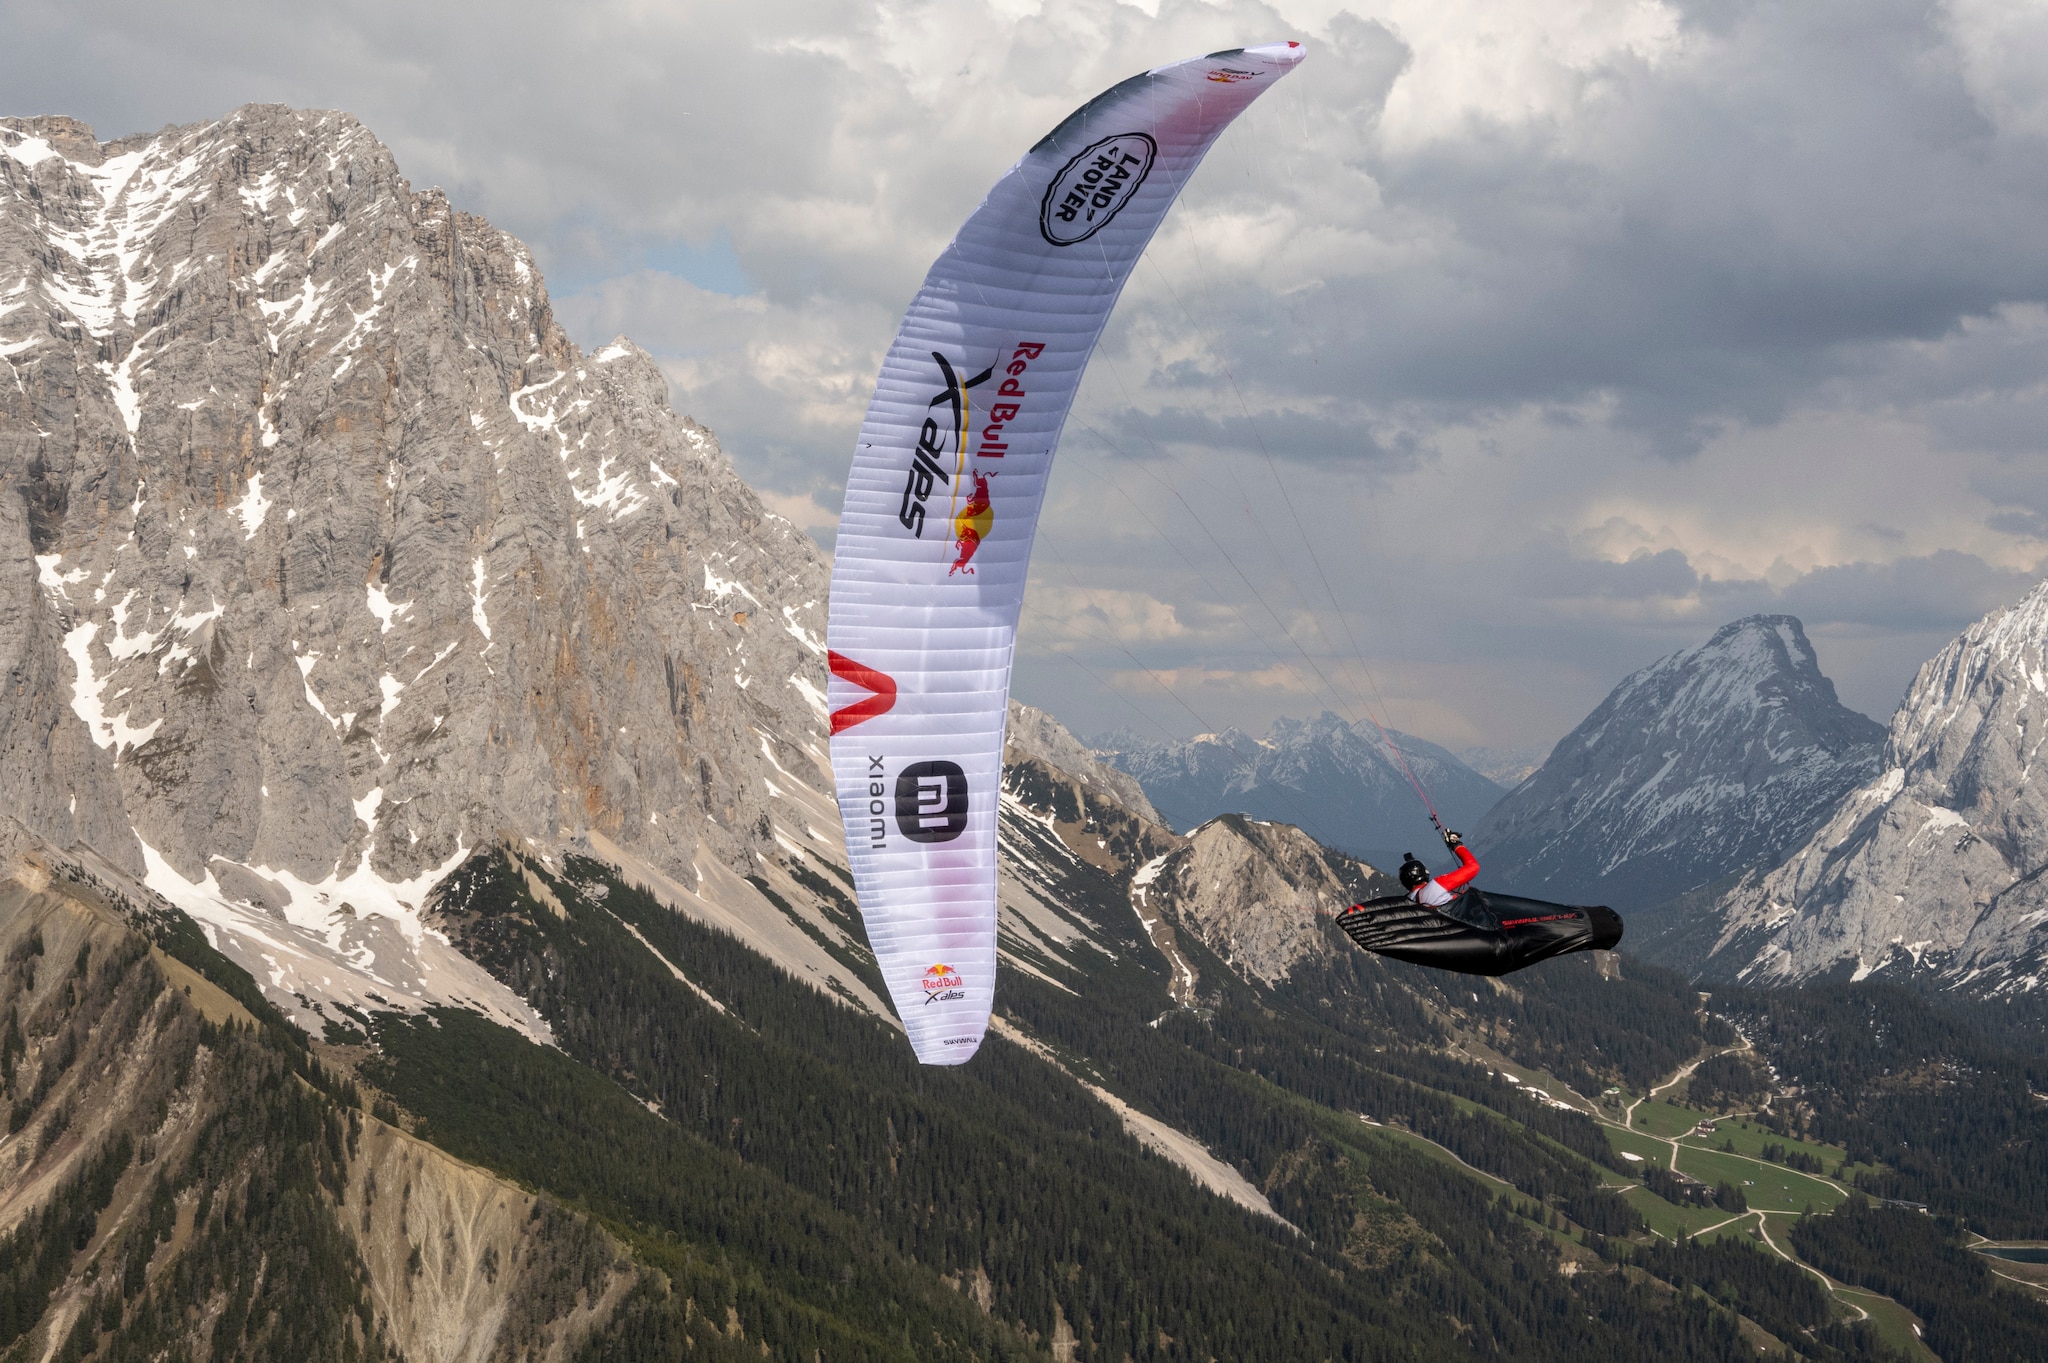 Participant flies during the Red Bull X-Alps preparations in Lermoos, Austria on june 02, 2021